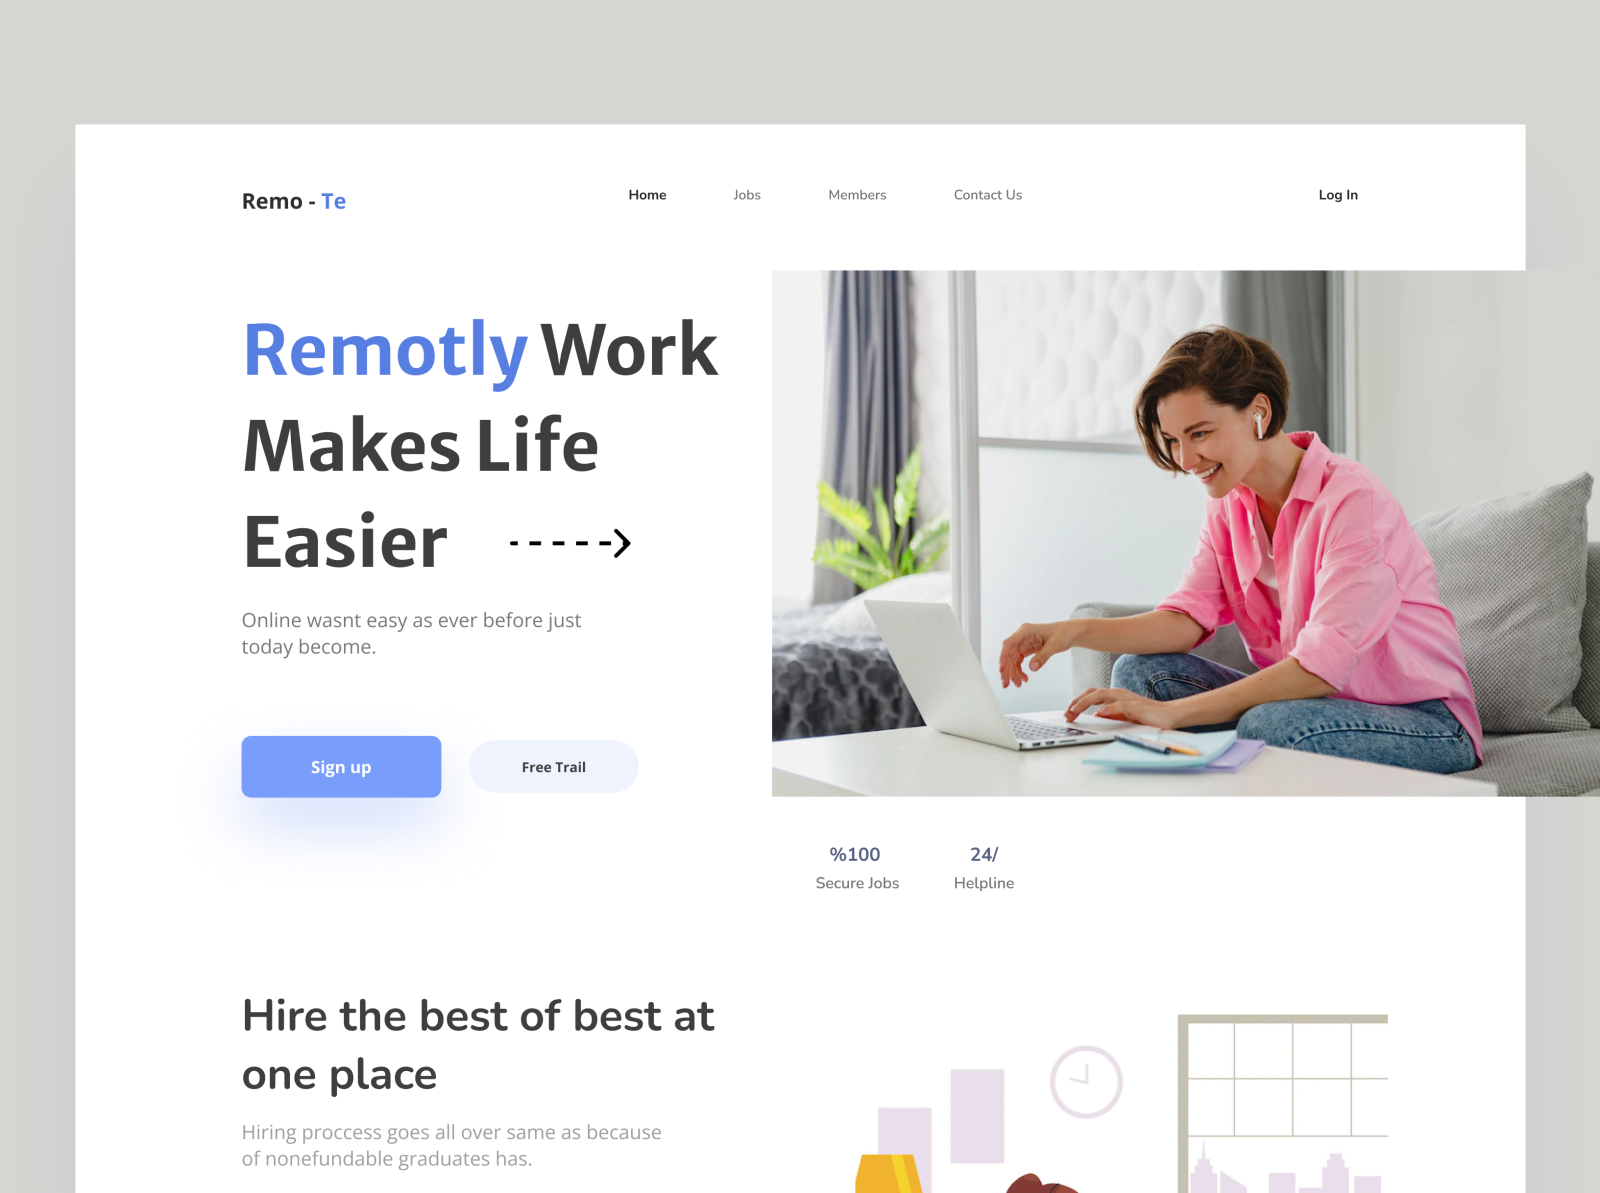 Remotely Work concept free idea illustration image mansoor page stock ui unlikeothers ux webdesign